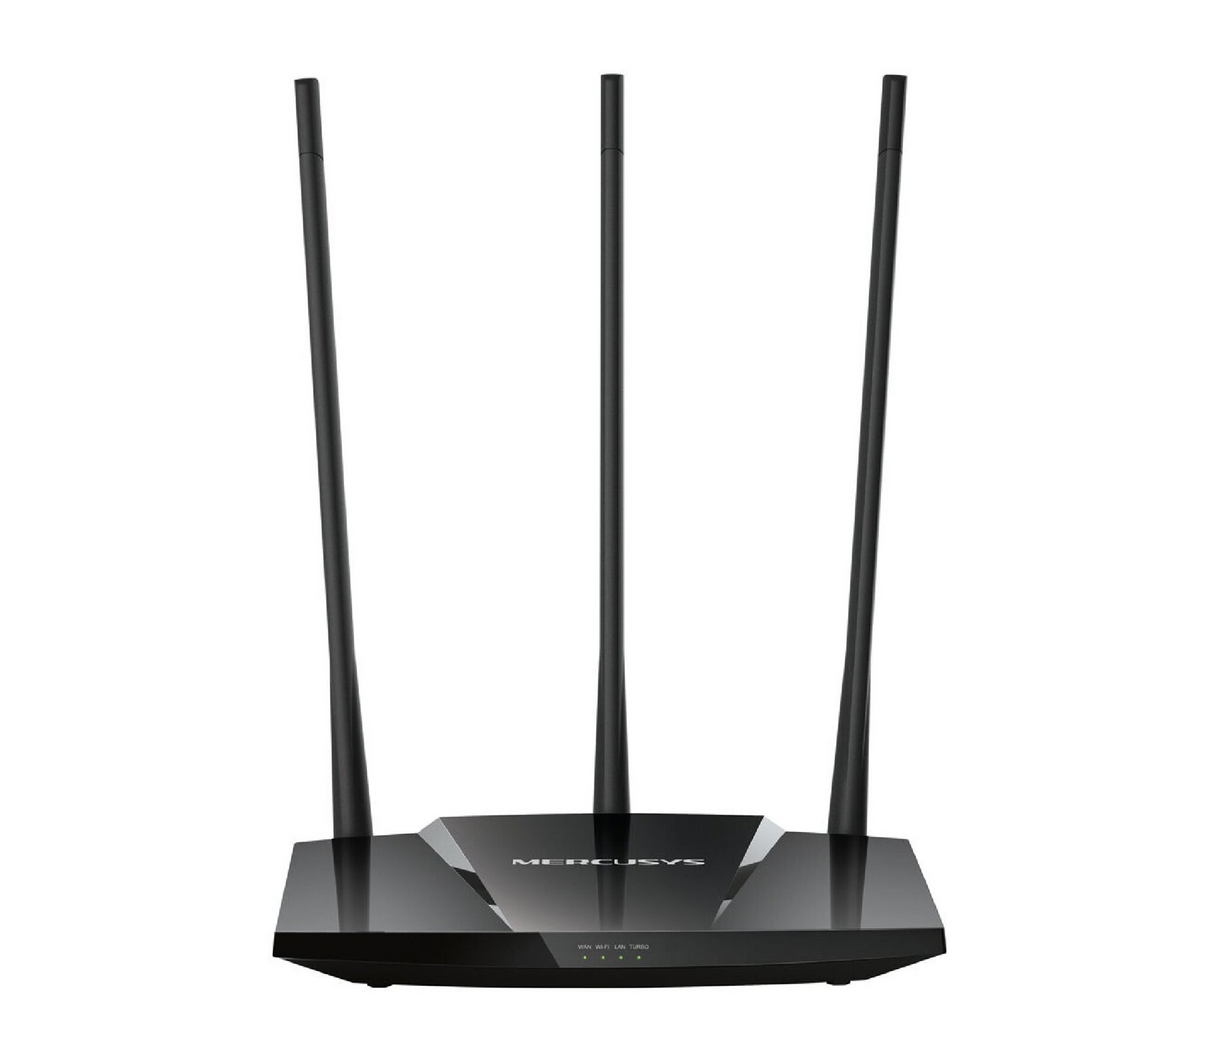 Router inalámbrico MW330HP Mercusys